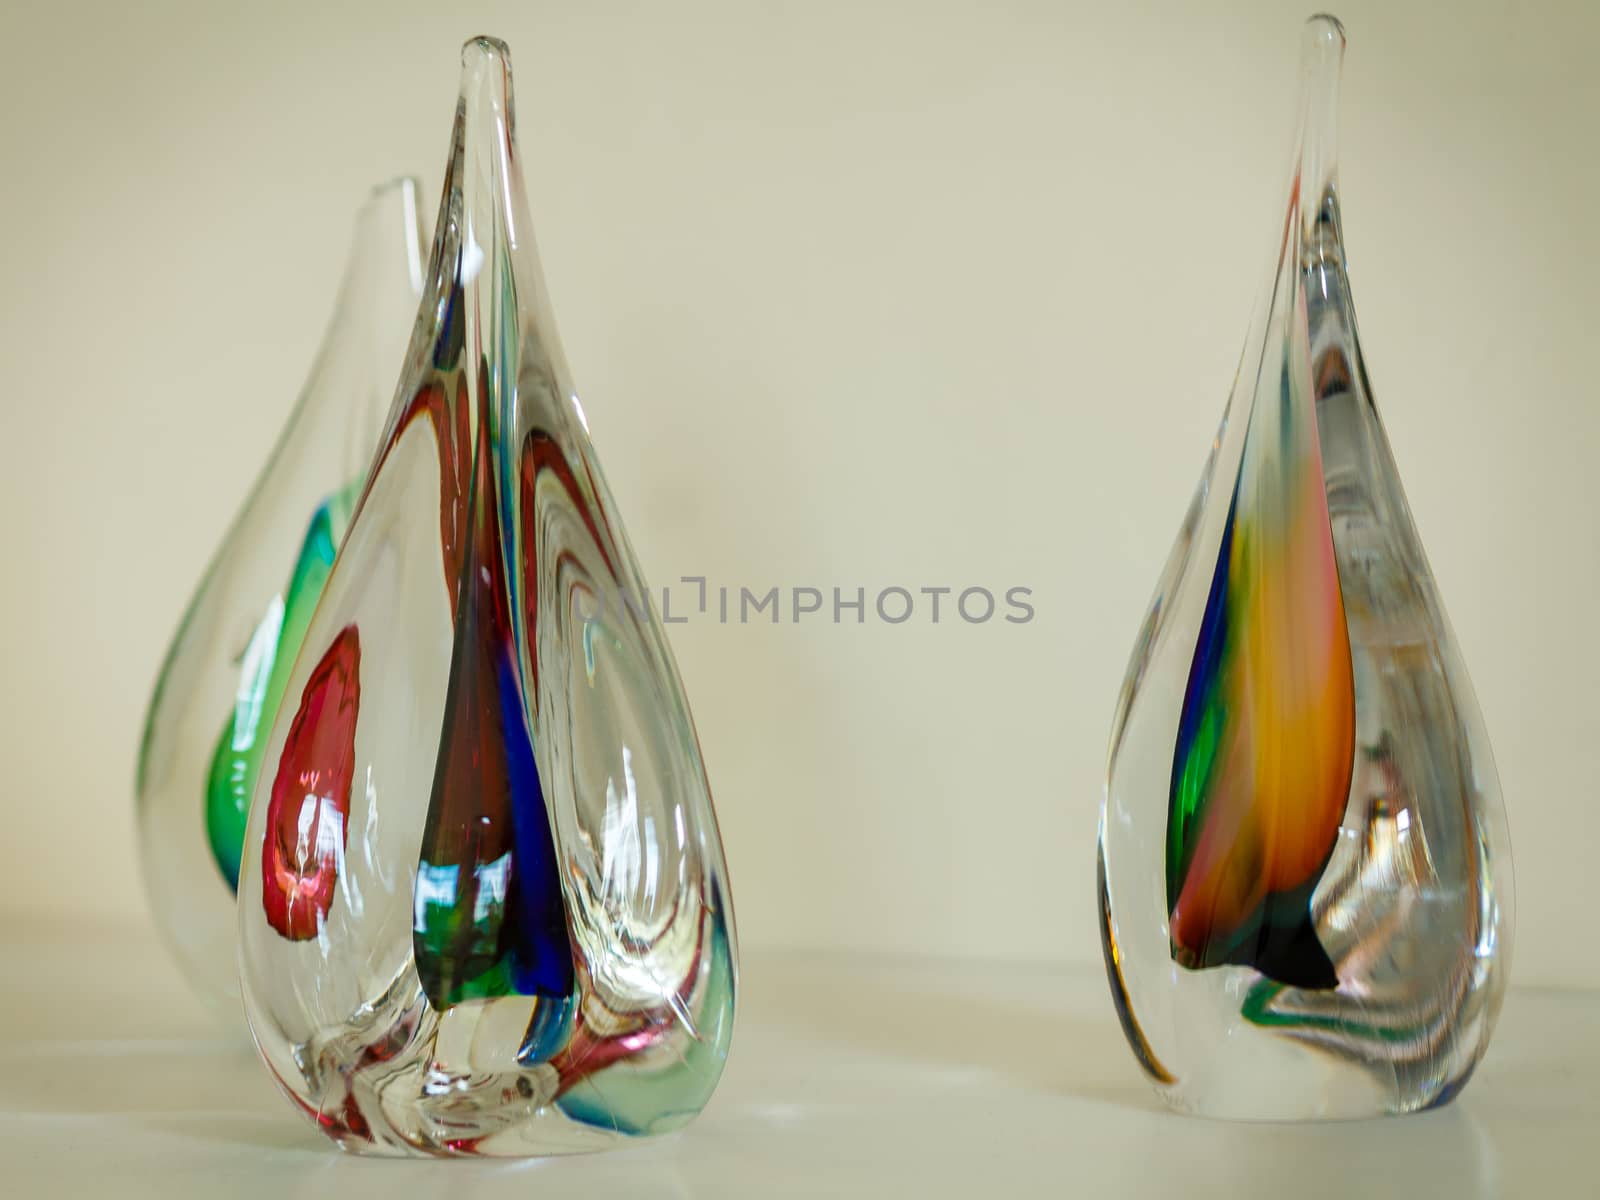 Three colorful glass sculptures by frankhoekzema